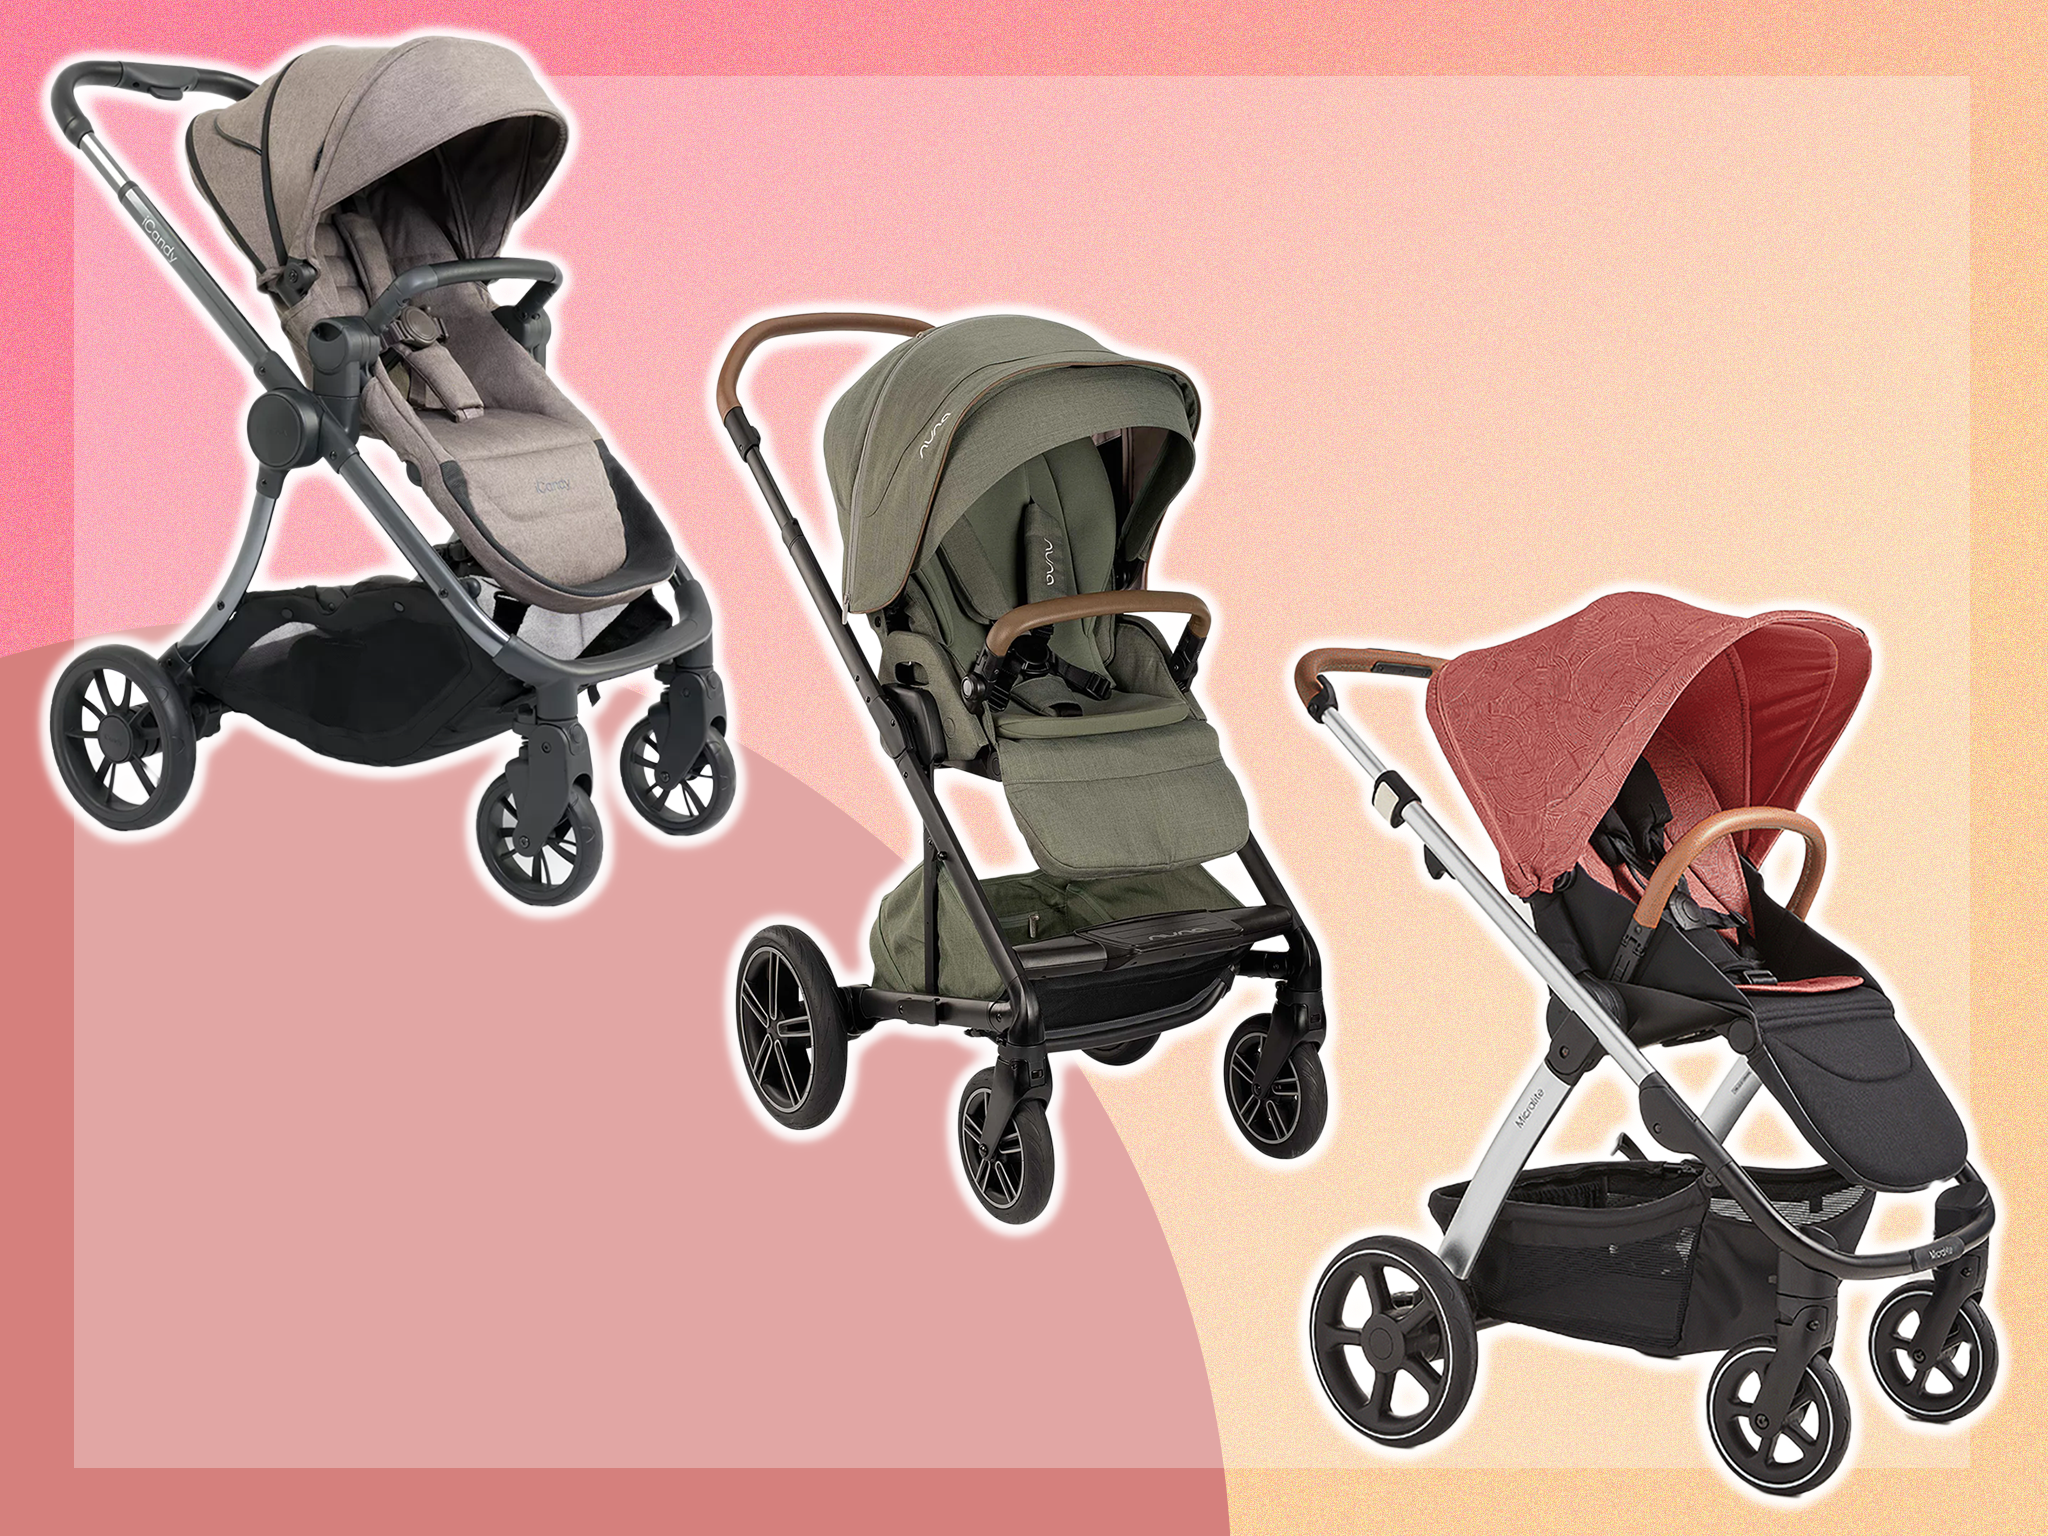 Silver Cross Clic stroller review - Lightweight buggies & strollers -  Pushchairs